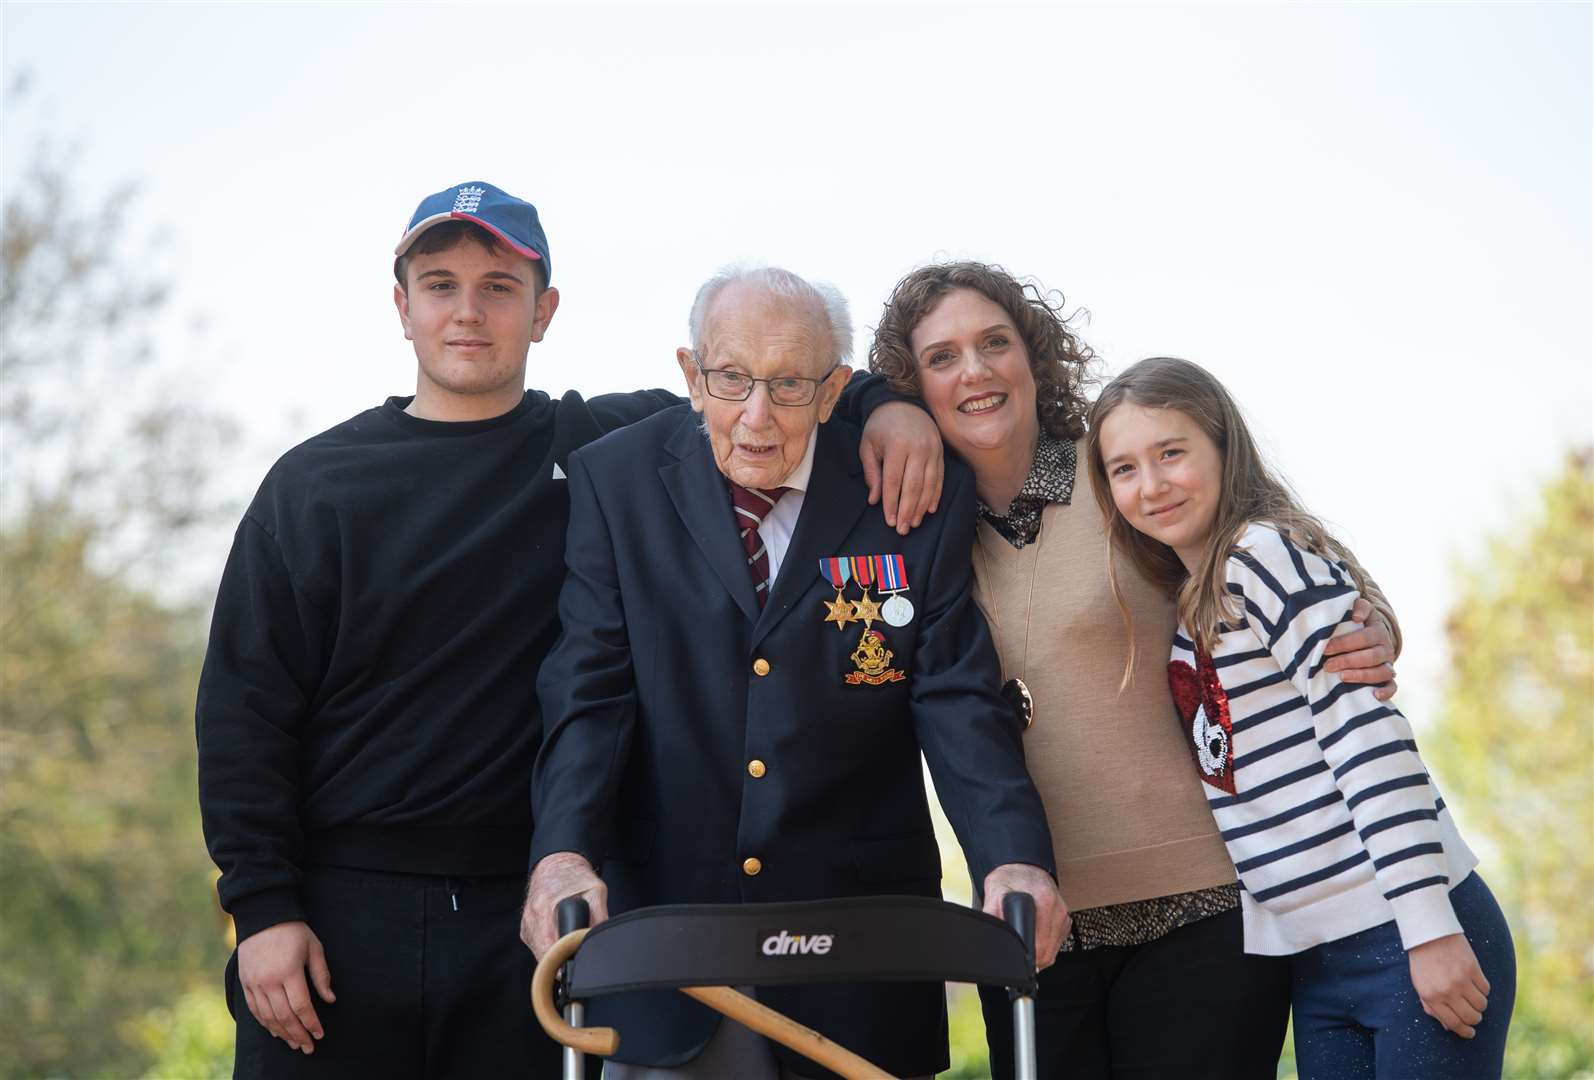 Cpt Moore, with (from left) grandson Benji, daughter Hannah Ingram-Moore and granddaughter Georgia, at his home in Marston Moretaine (Joe Giddens/PA)